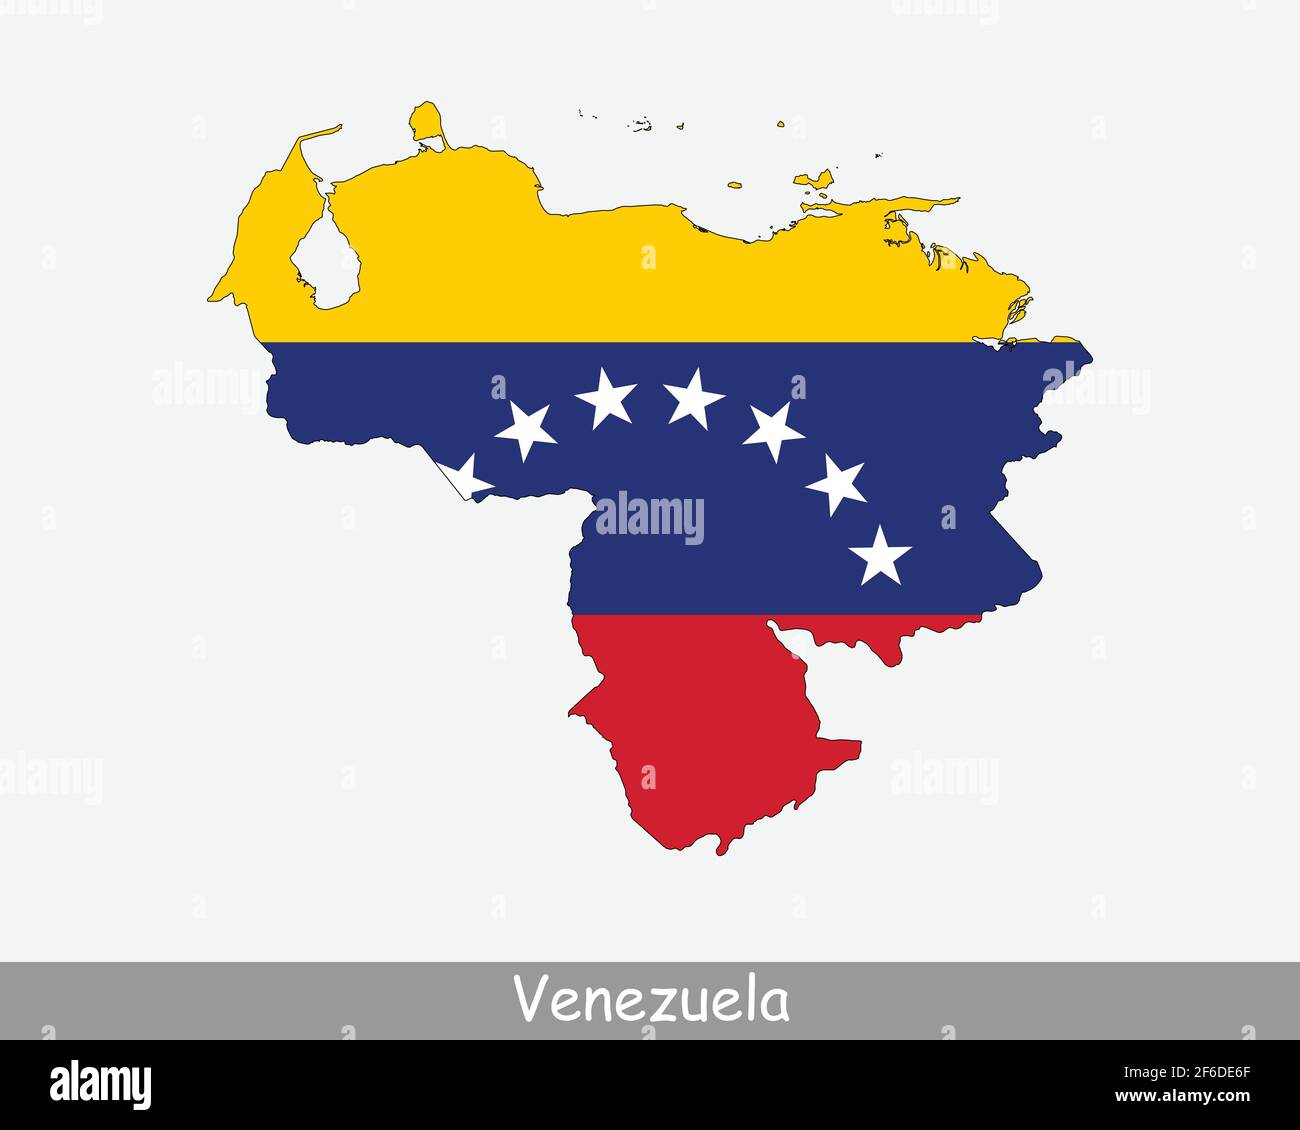 Venezuela Flag Map. Map of the Bolivarian Republic of Venezuela with the Venezuelan national flag isolated on a white background. Vector Illustration. Stock Vector